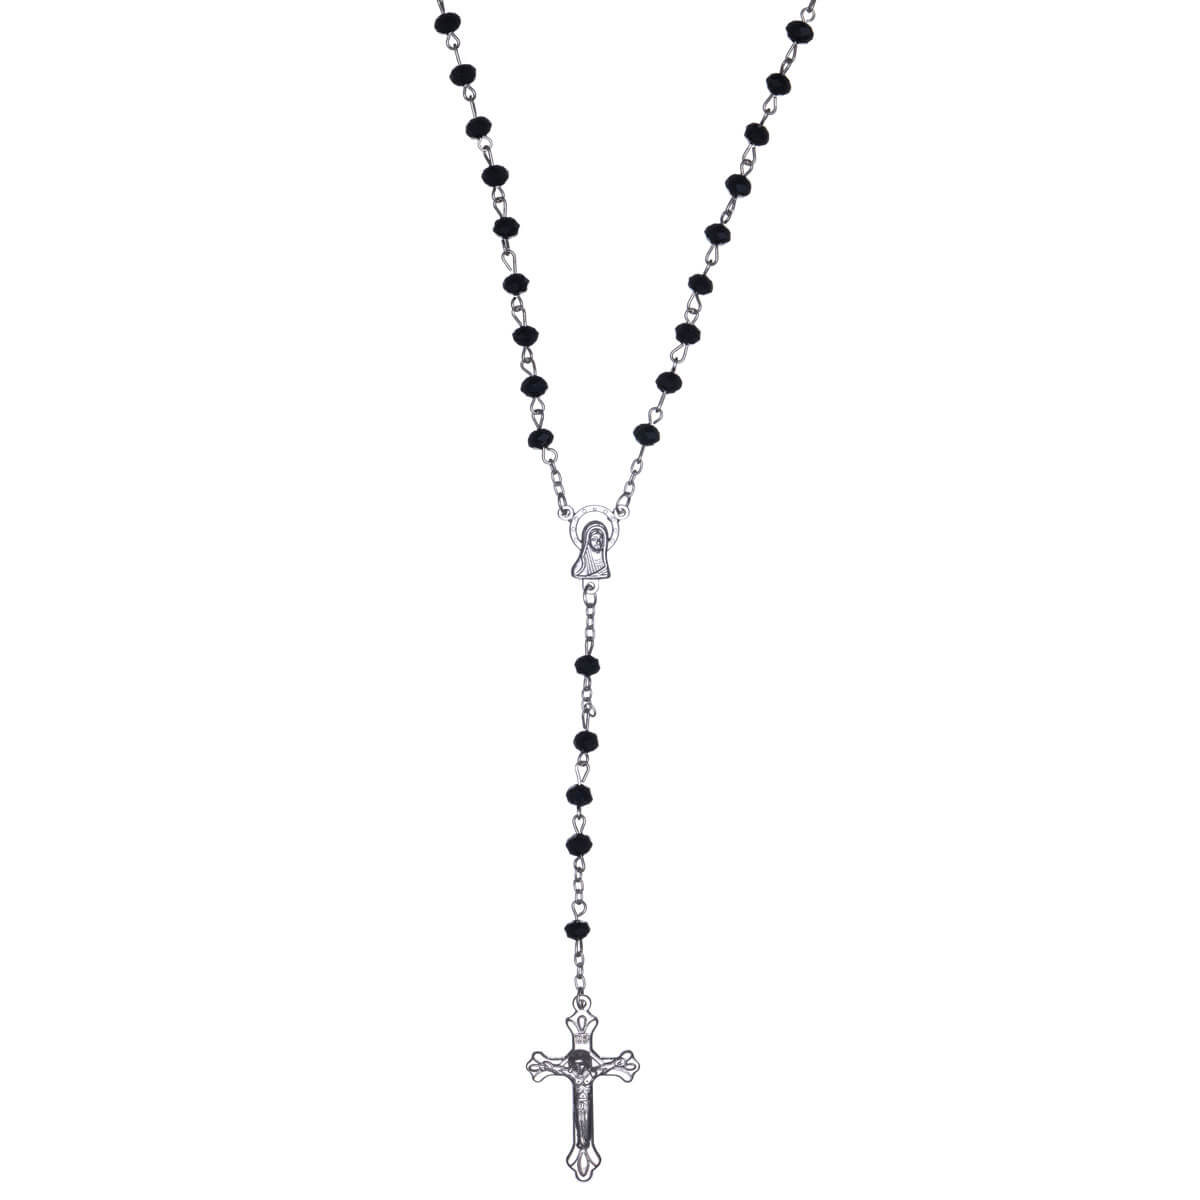 Black rosary beads with beveled glass beads 6mm